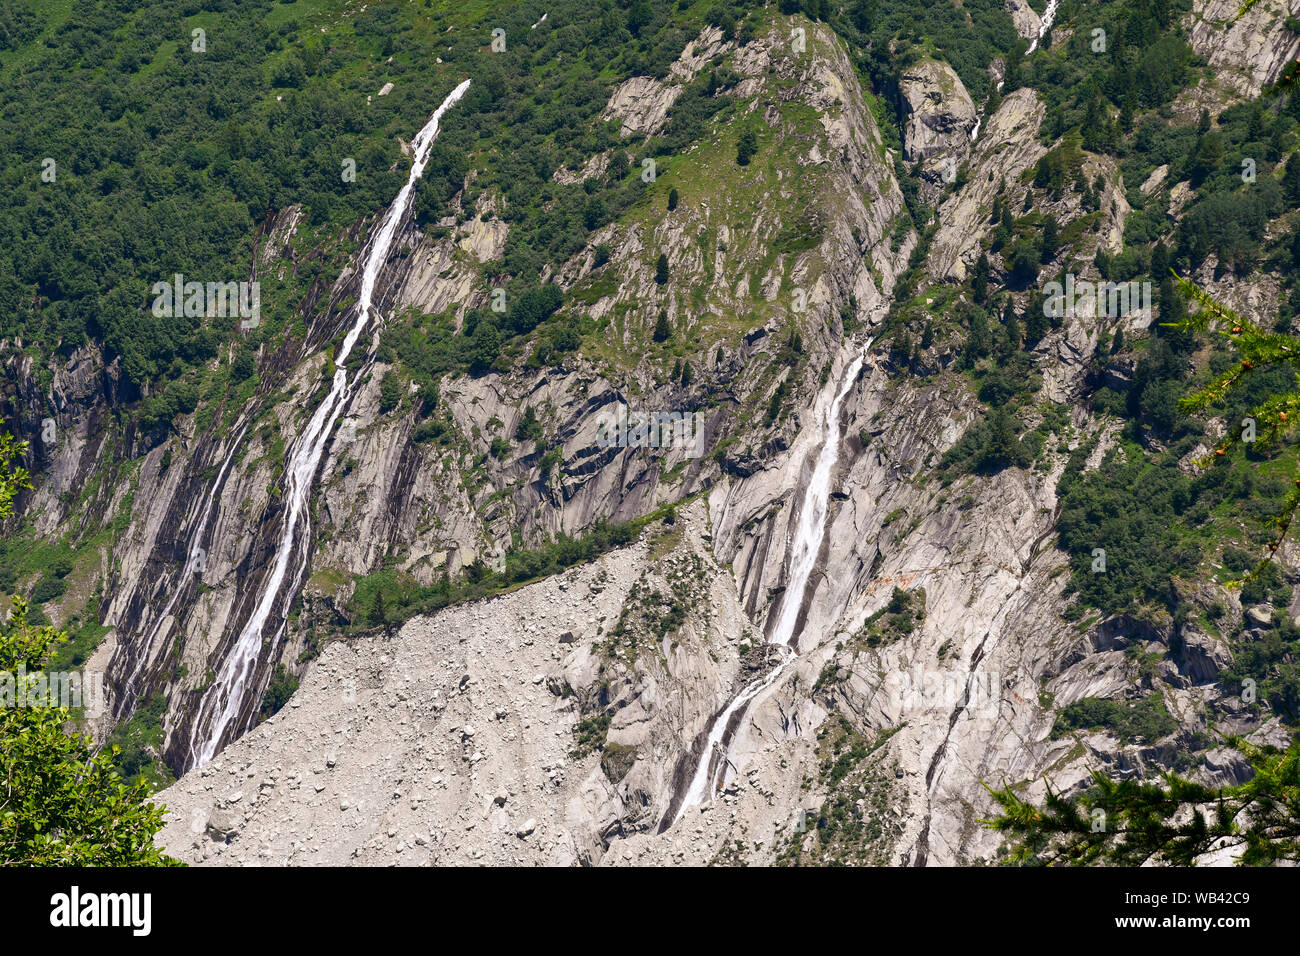 Waterfalls on the slope of the Aiguilles du Dru, a mountain of the Mont Blanc massif in the French Alps, in summer, Montenvers, Chamonix, France Stock Photo